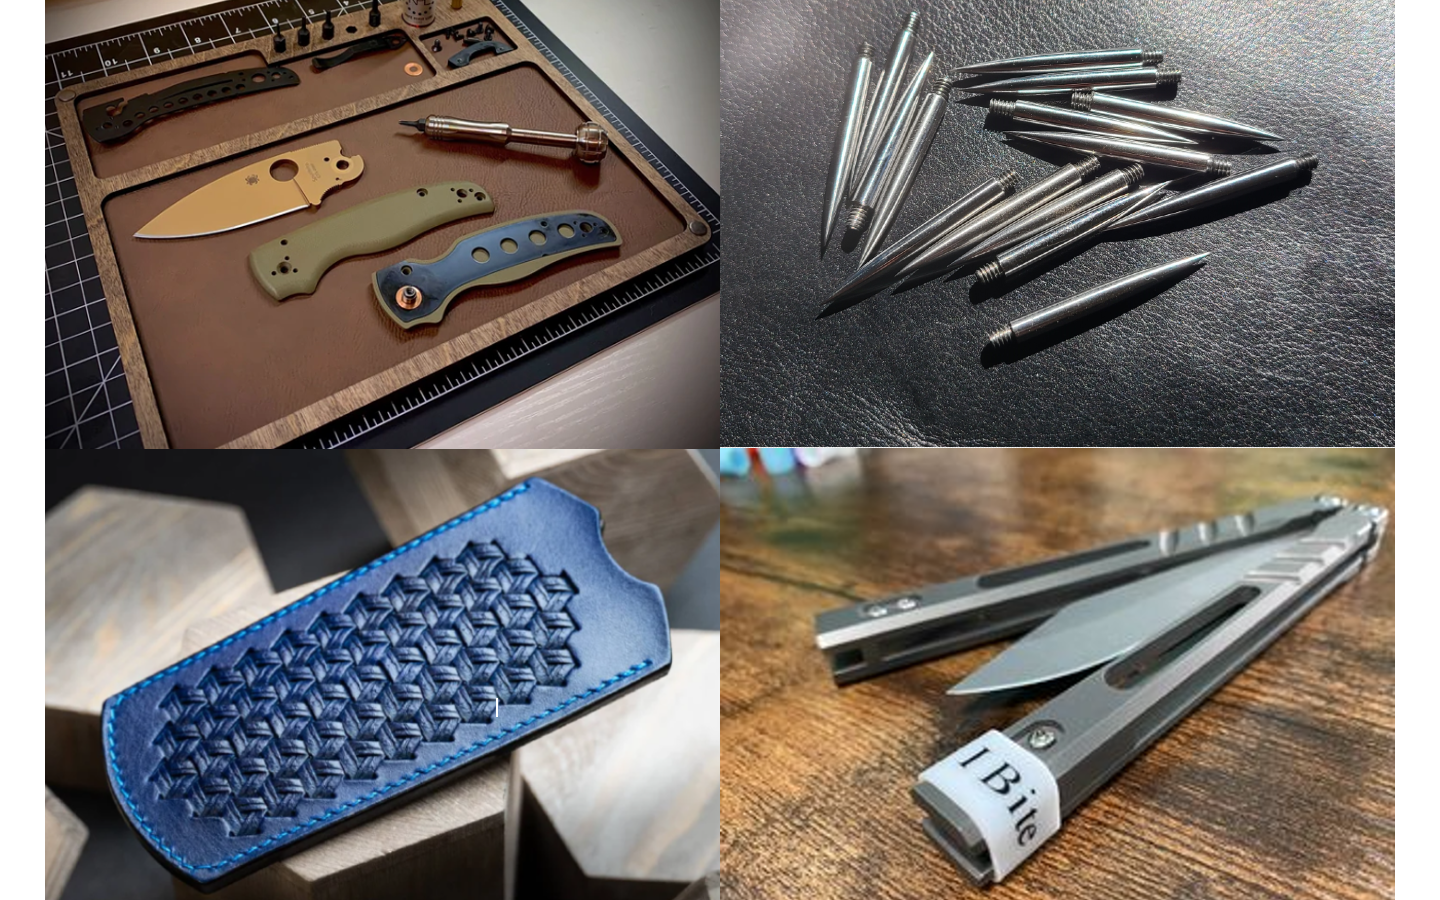 The Top 13 Aftermarket Balisong Accessories